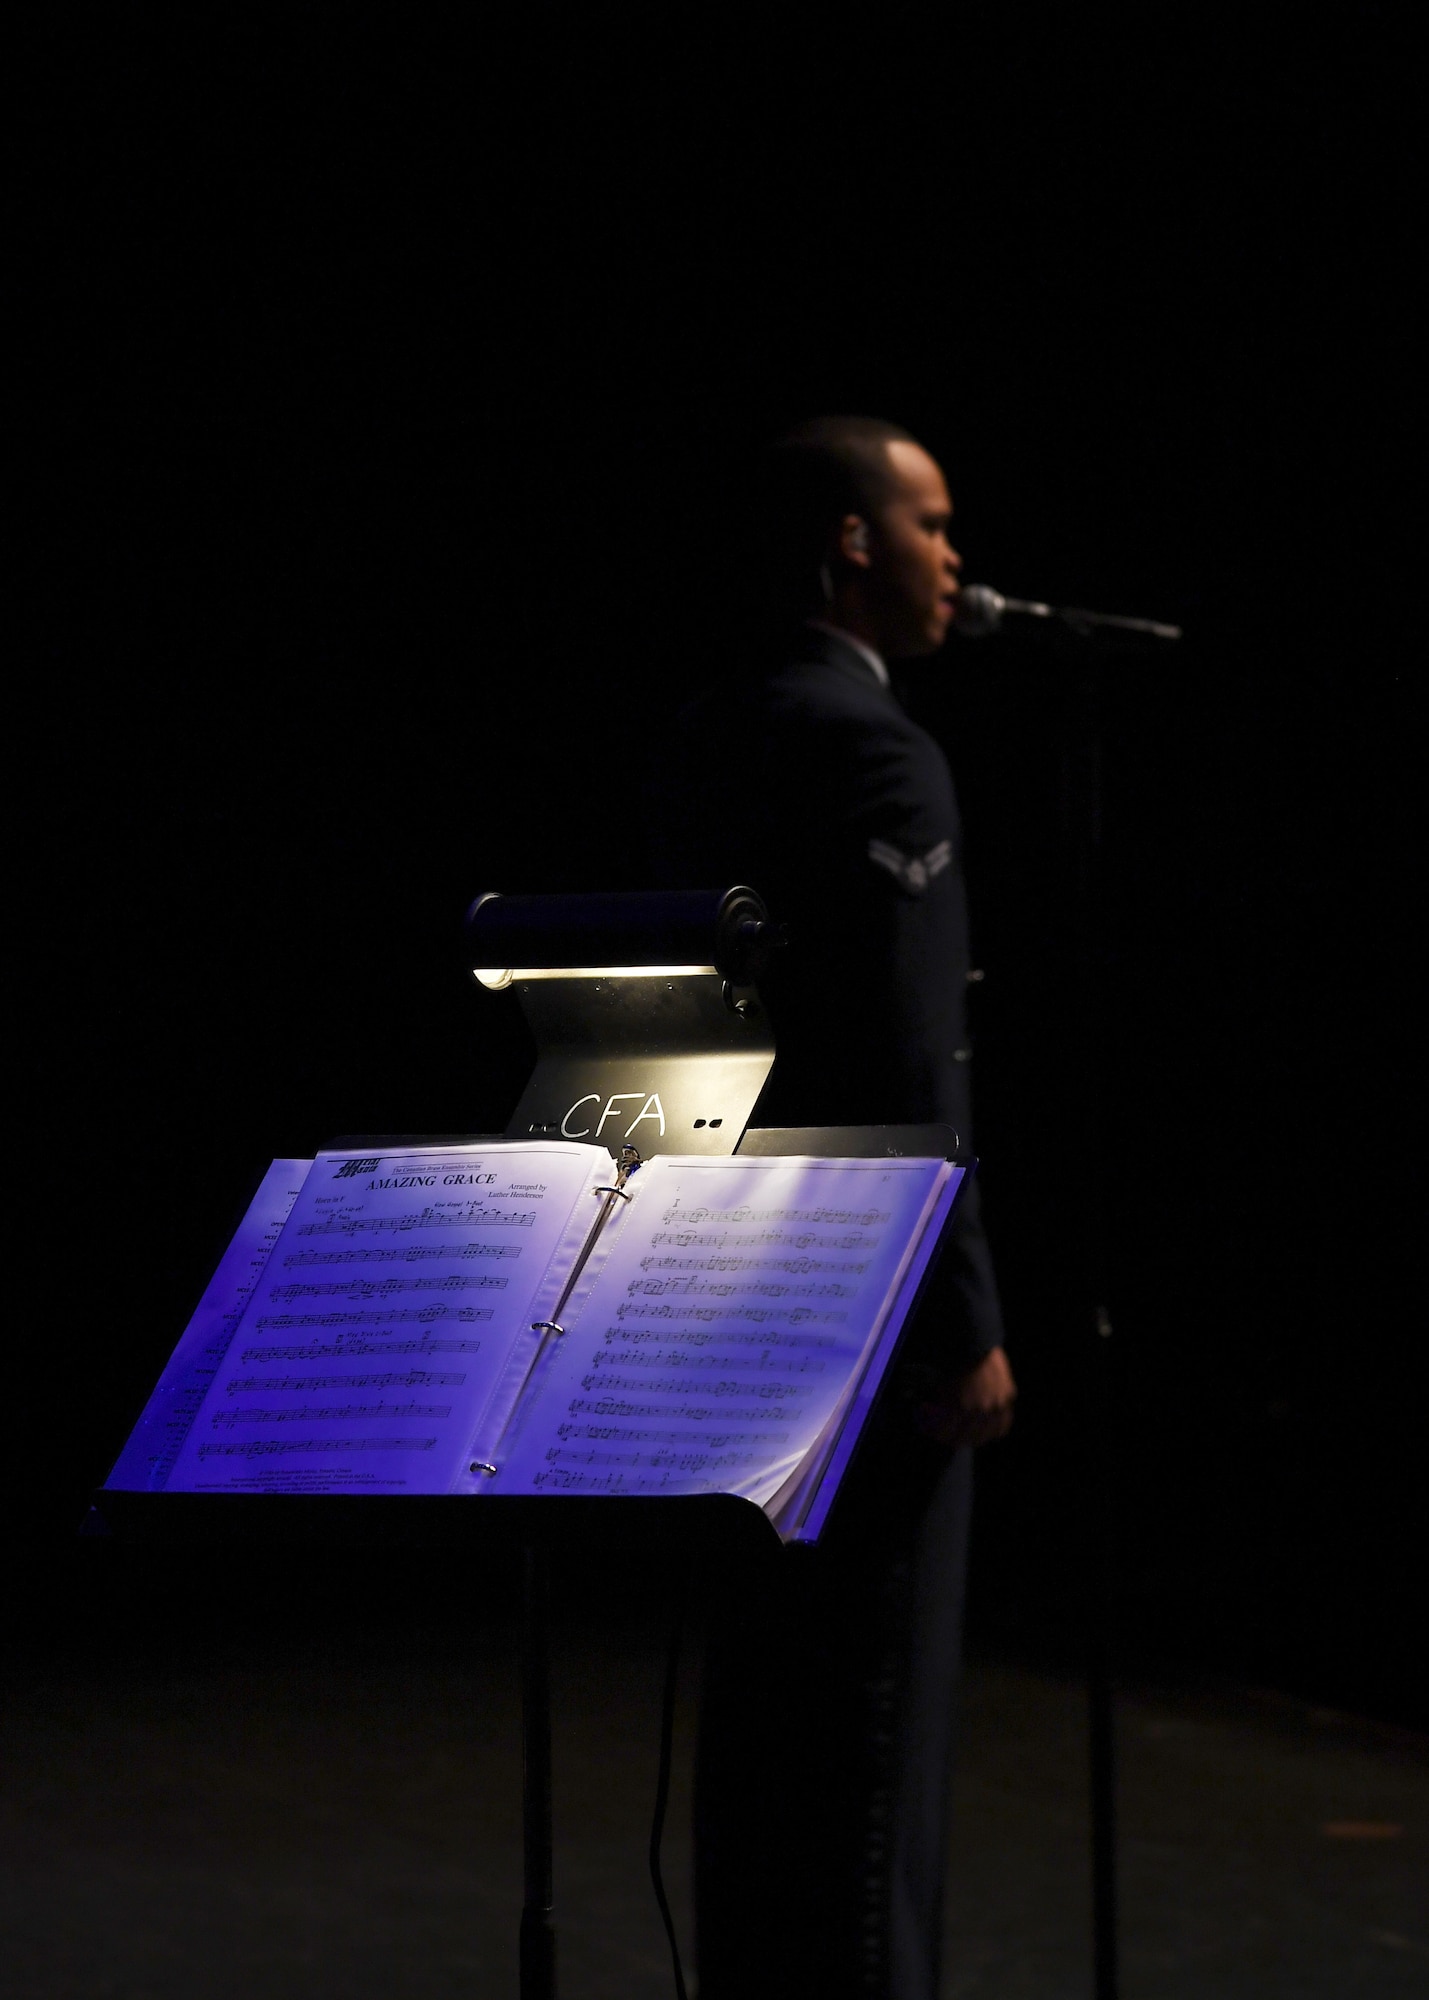 Airman 1st Class Mario Foreman-Powell, U.S. Air Force Heartland of America Band vocalist, sings for a crowd of about 700 people during a special Veterans Day concert honoring veterans and military service members November 6, 2018, at the Chester Fritz Auditorium in Grand Forks, North Dakota. Comprised of nine musicians and three vocalists, the band travels the country performing in a wide variety of venues to demonstrate Air Force excellence and precision. (U.S. Air Force photo by Airman 1st Class Elora J. Martinez)